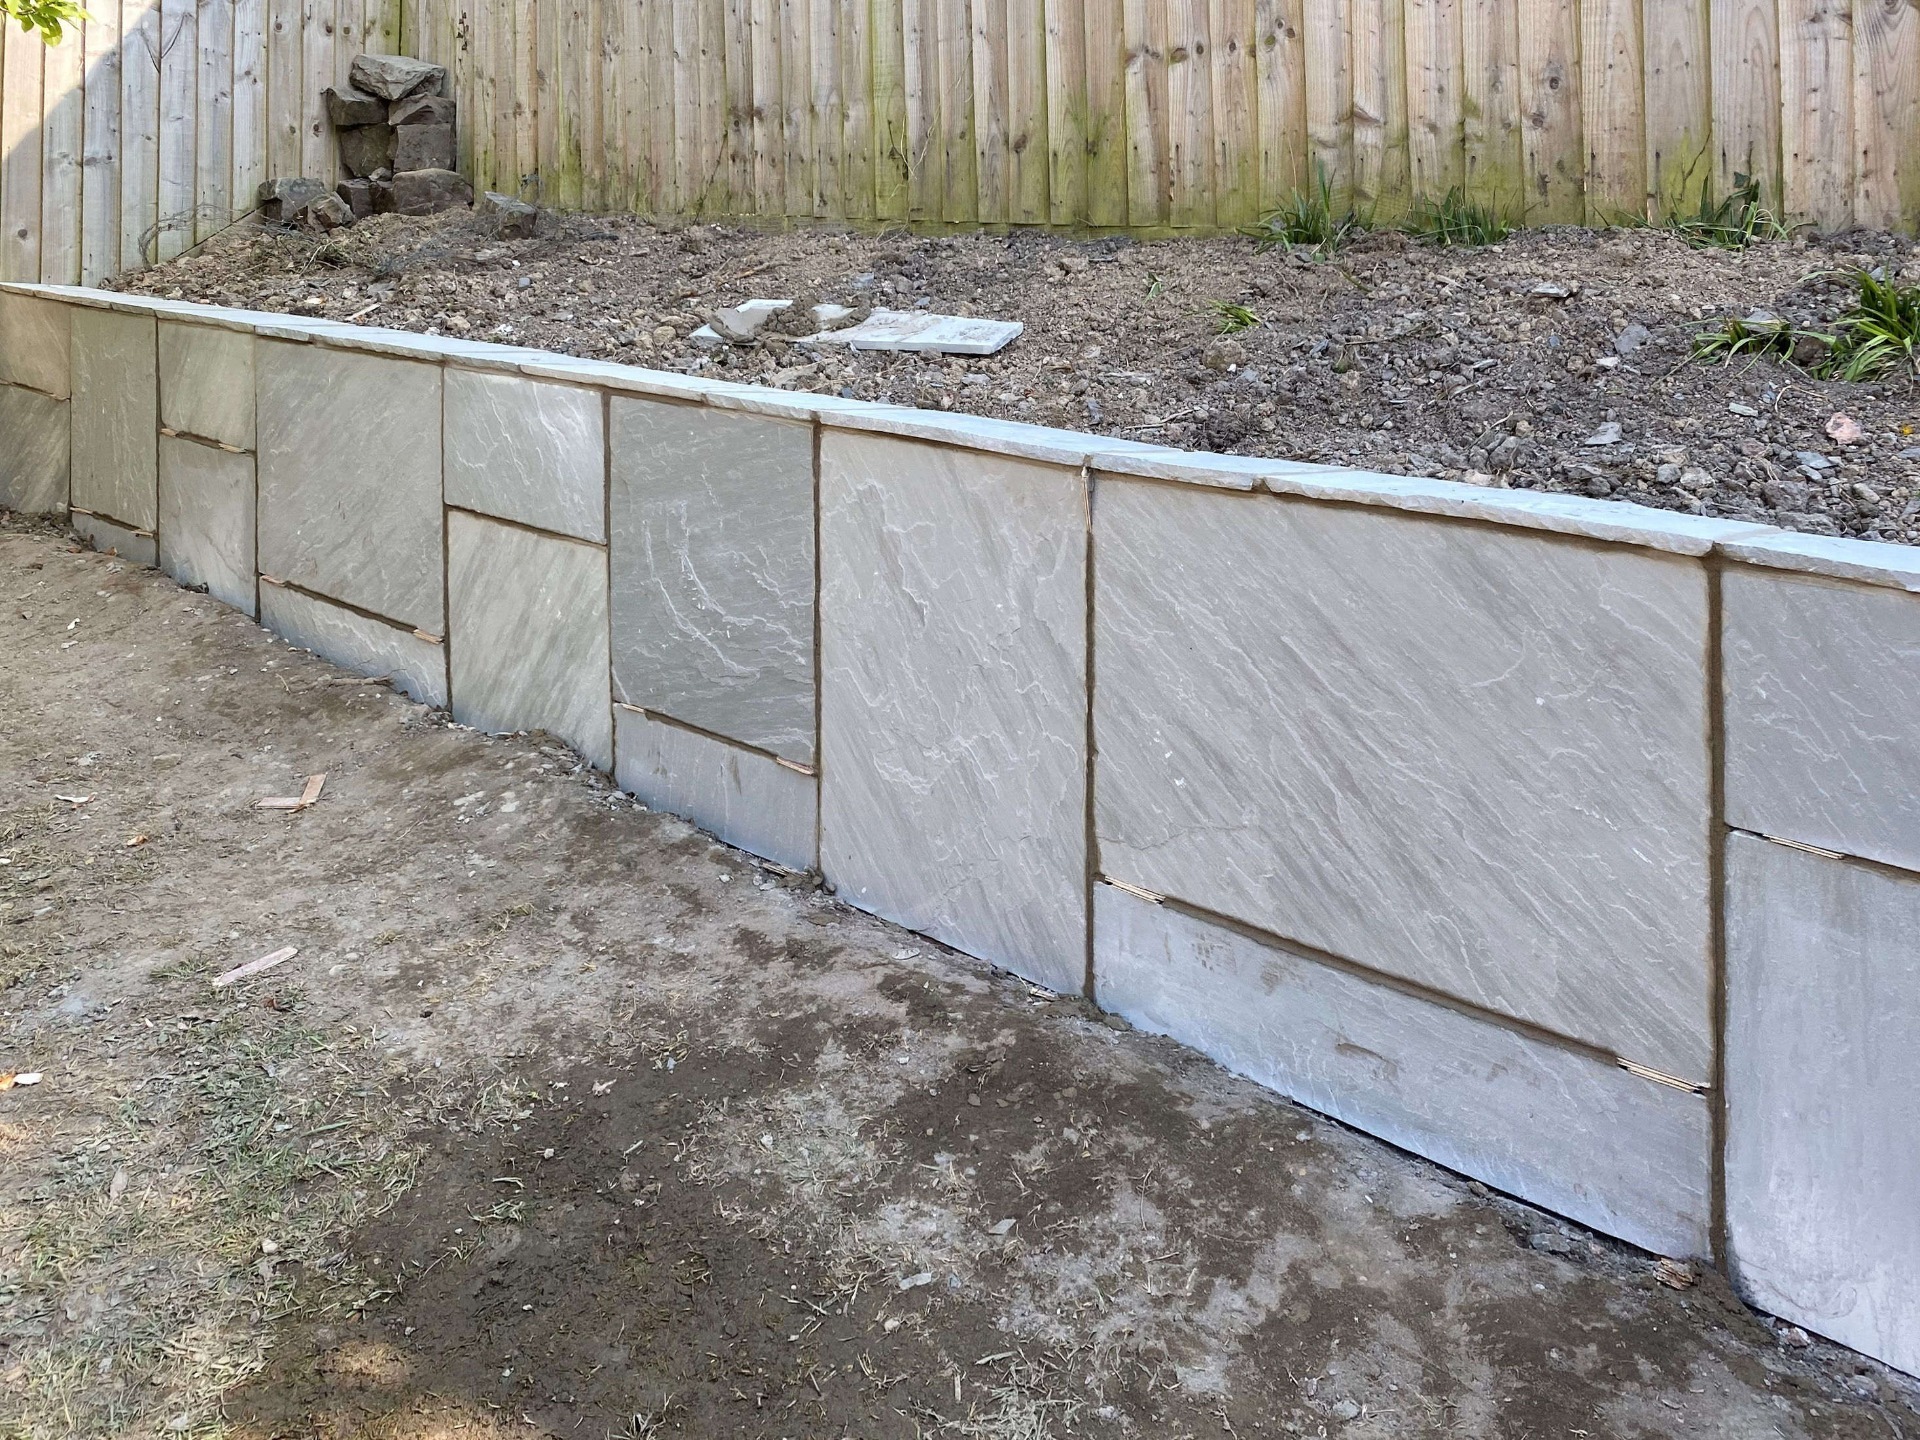 Patio Wall Path. Block work retaining wall face clad with Indian sandstone to match patio pattern. Barnstaple North Devon